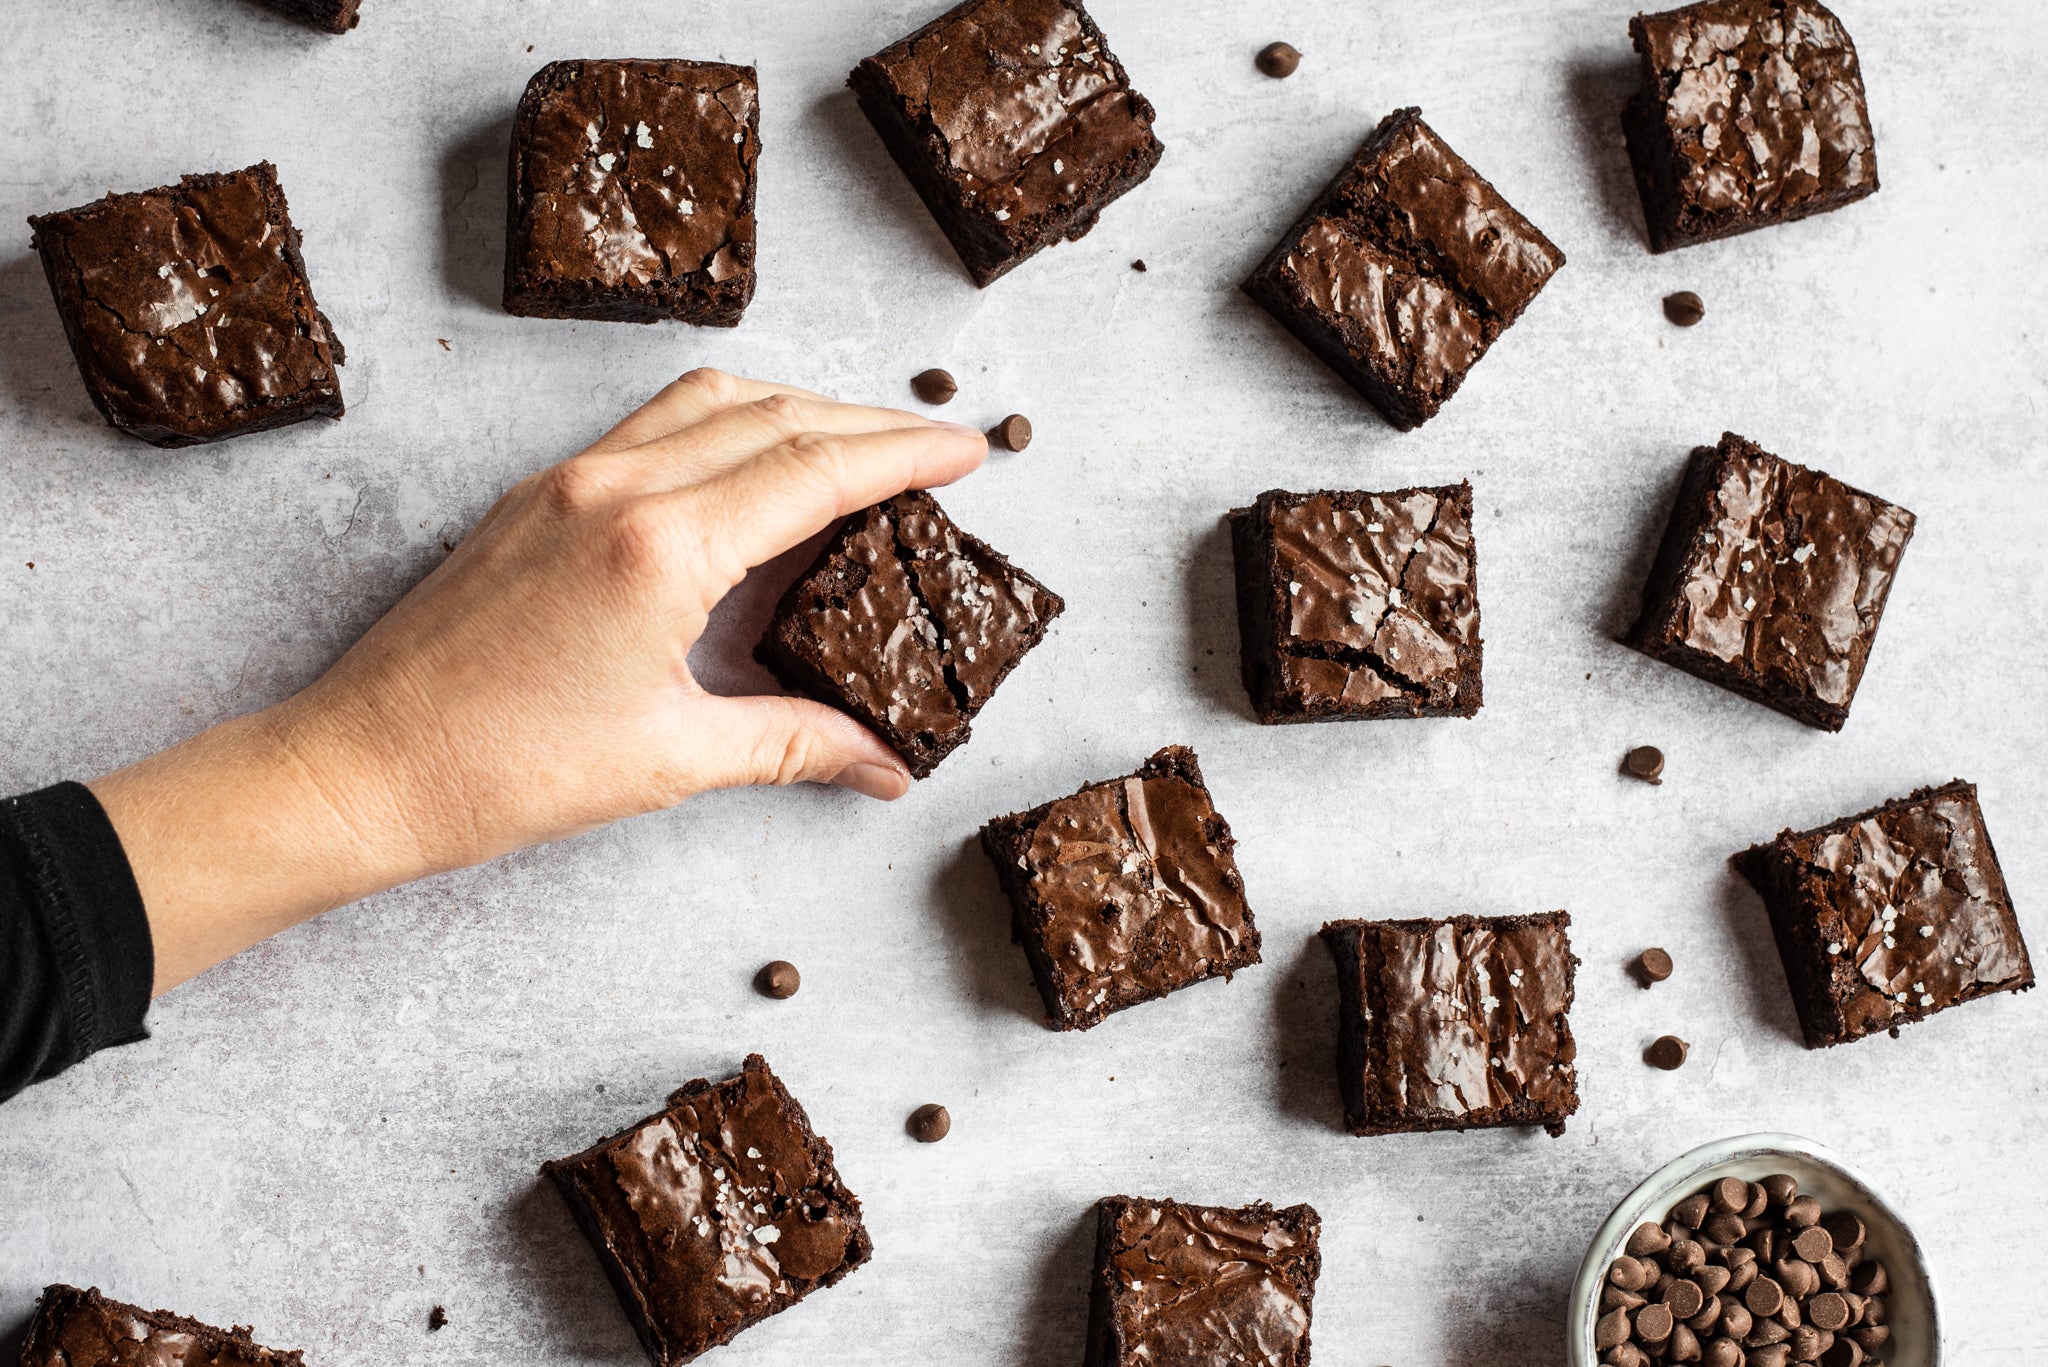 A top down view of chocolate brownies with a hand coming into frame picking up a brownie